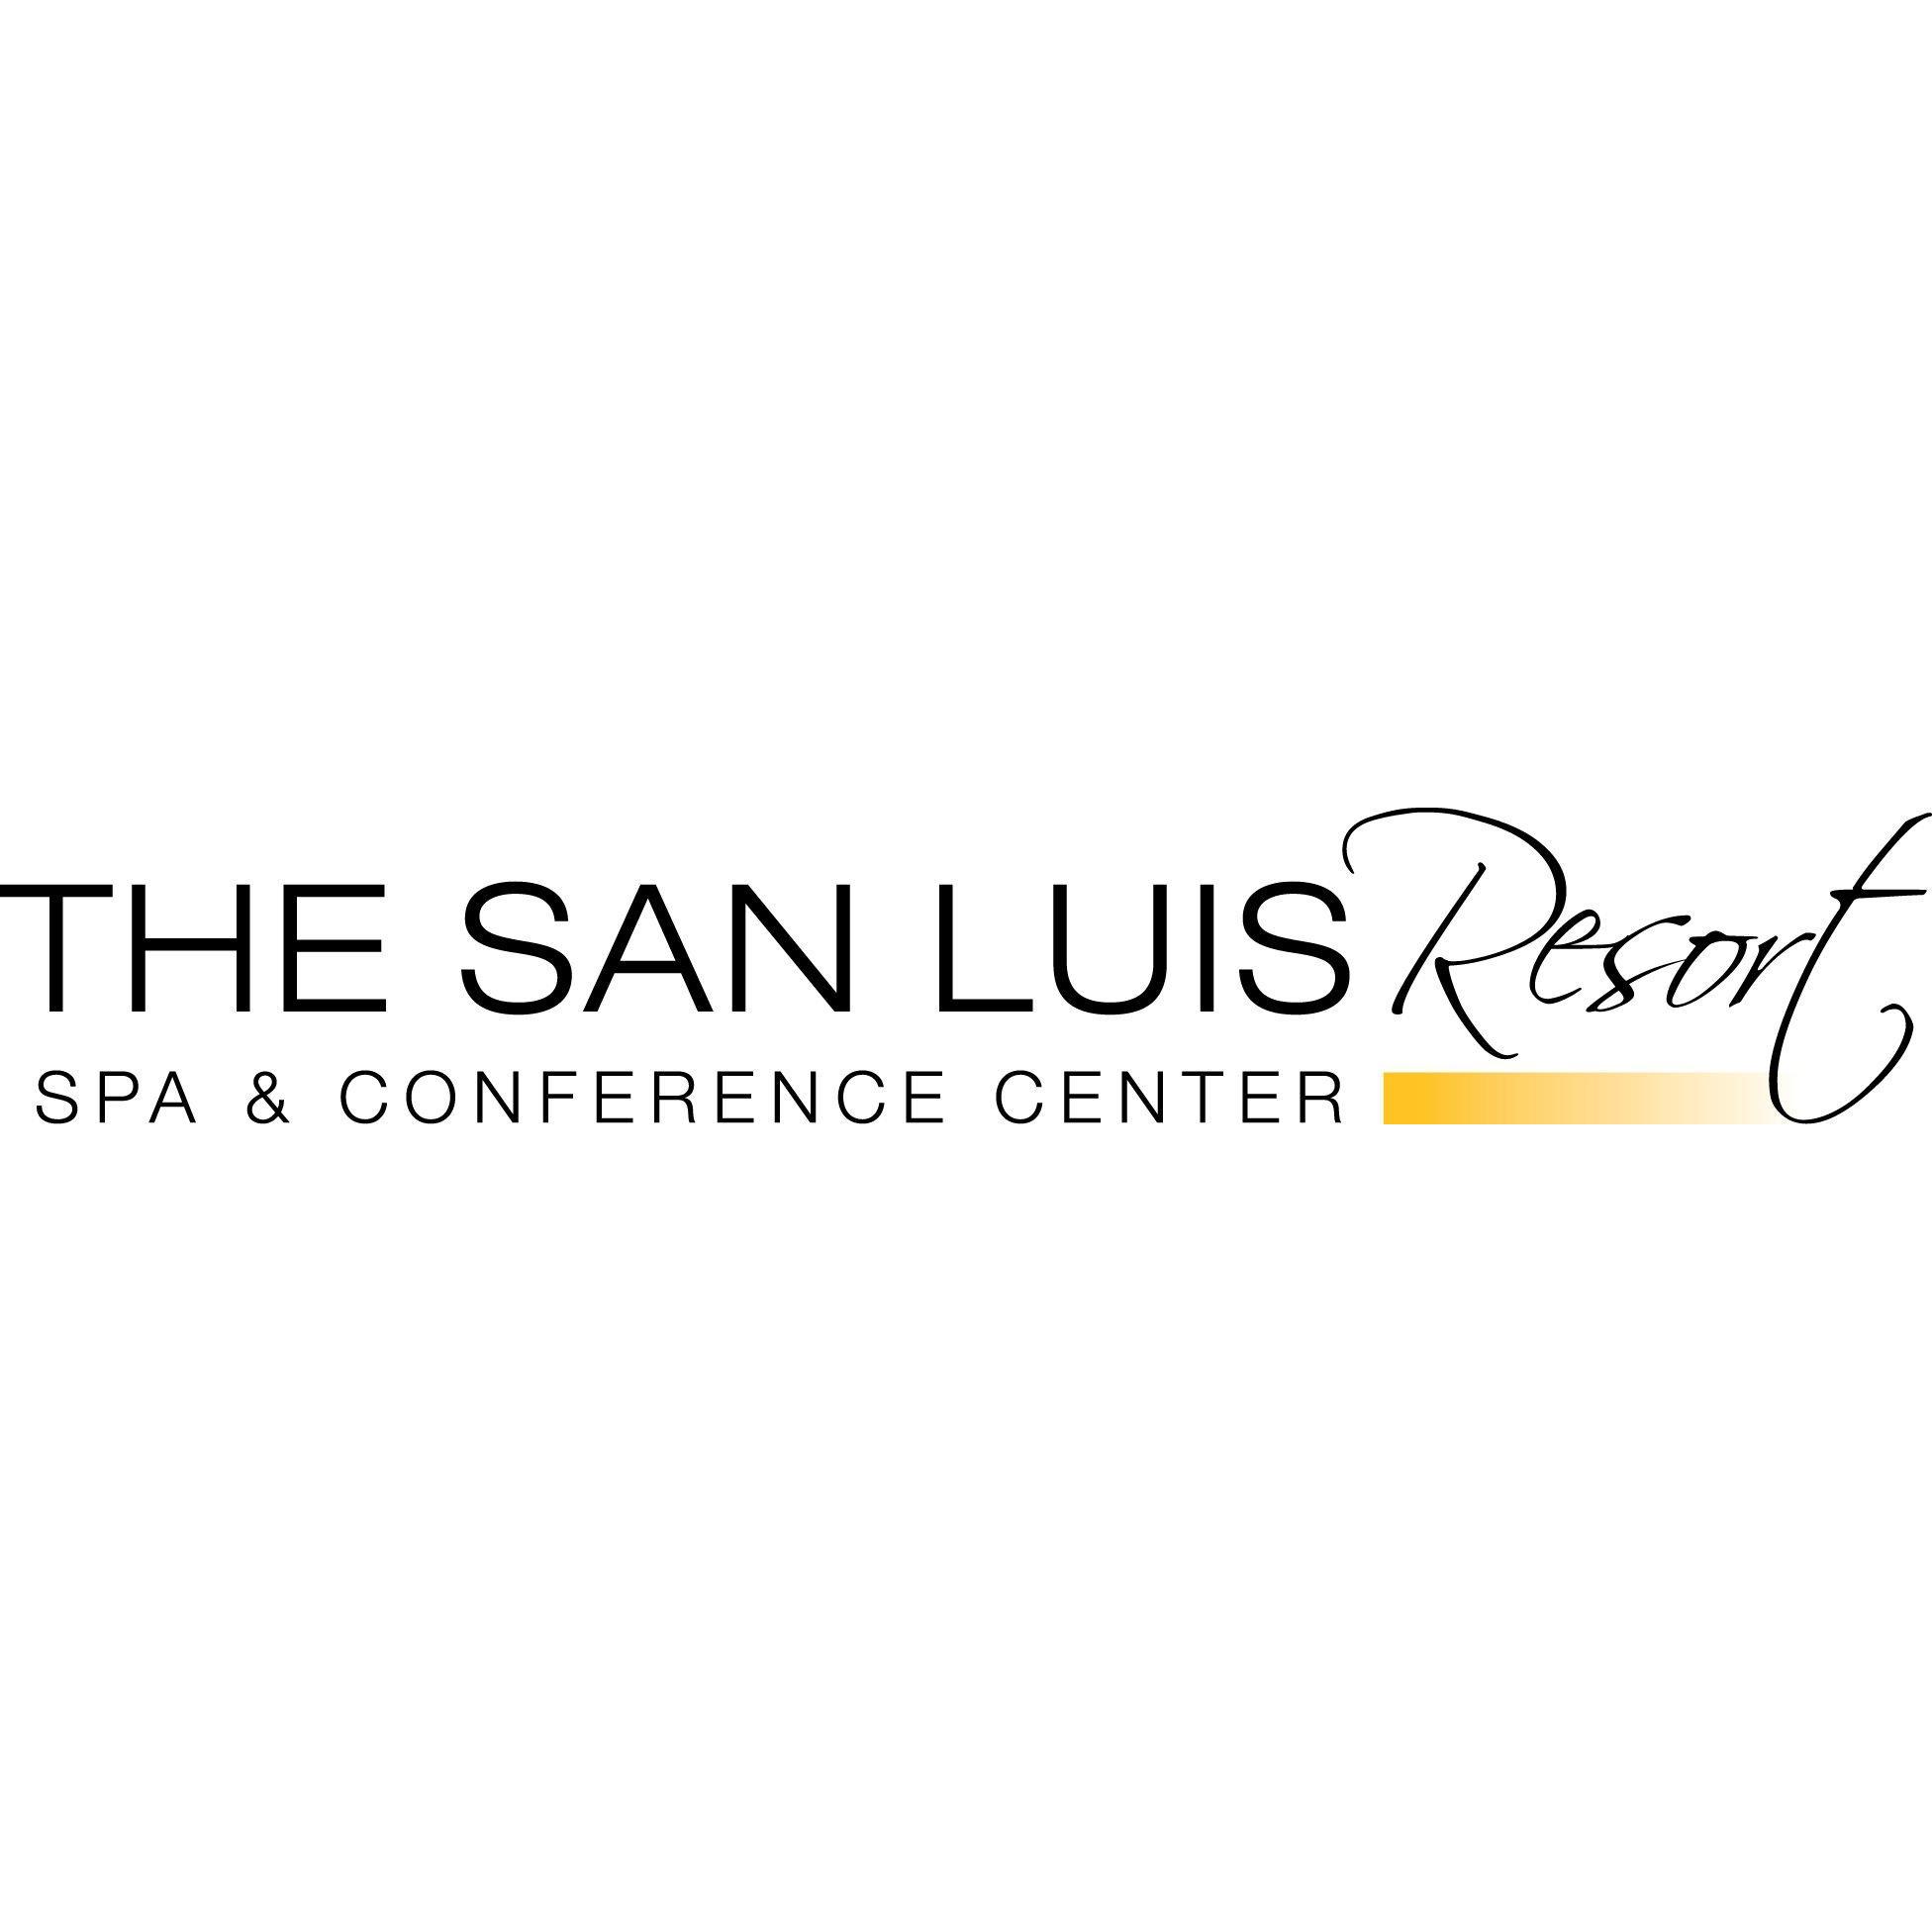 The San Luis Resort, Spa and Conference Center Galveston (409)744-1500